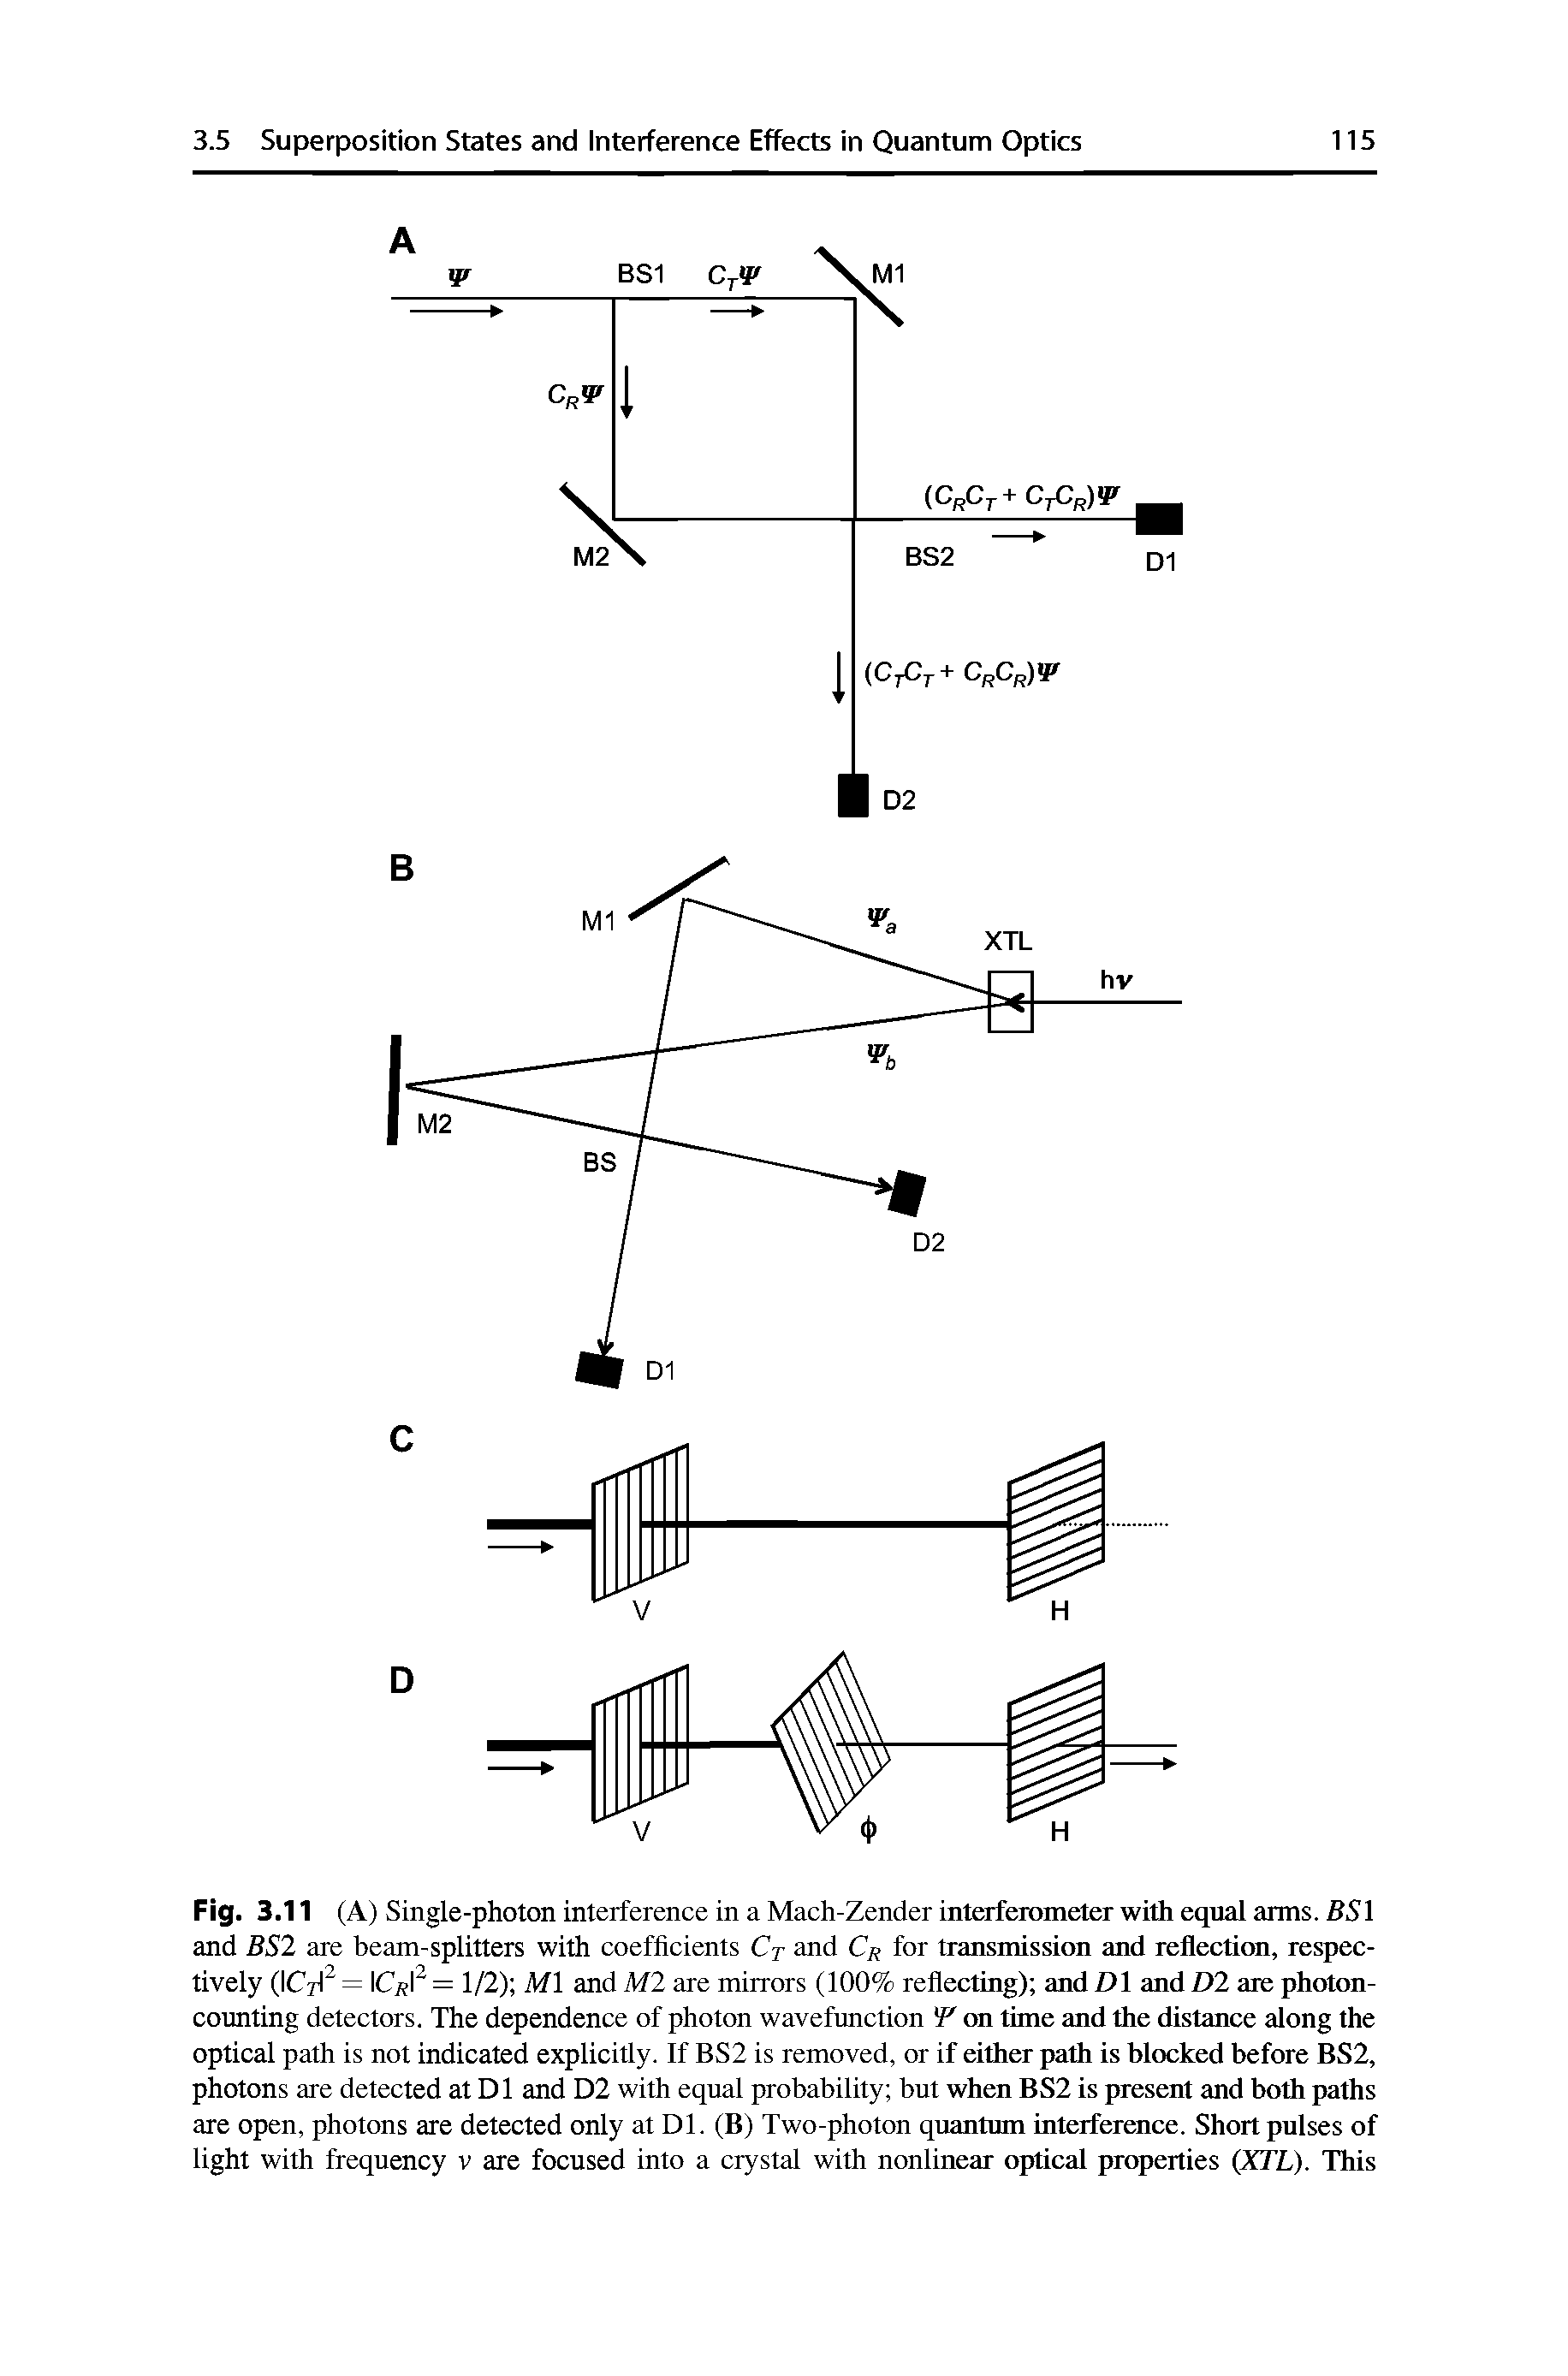 Fig. 3.11 (A) Single-photon interference in a Mach-Zender interferometer with equal arms. BSl and BS2 are beam-splitters with coefficients Ct and for transmission and reflectirai, respectively (ICrl = Cr = 1/2) Ml and M2 are mirrors (100% reflecting) and D and D2 are photoncounting detectors. The dependence of photon wavefunction If on time and the distance along the optical path is not indicated explicitly. If BS2 is removed, or if either path is blocked before BS2, photons are detected at D1 and D2 with equal probability but when BS2 is presem and both paths are open, photons are detected only at Dl. (B) Two-photon quantum interference. Short pulses of light with frequency v are focused into a crystal with nonlinear optical properties (XTL). This...